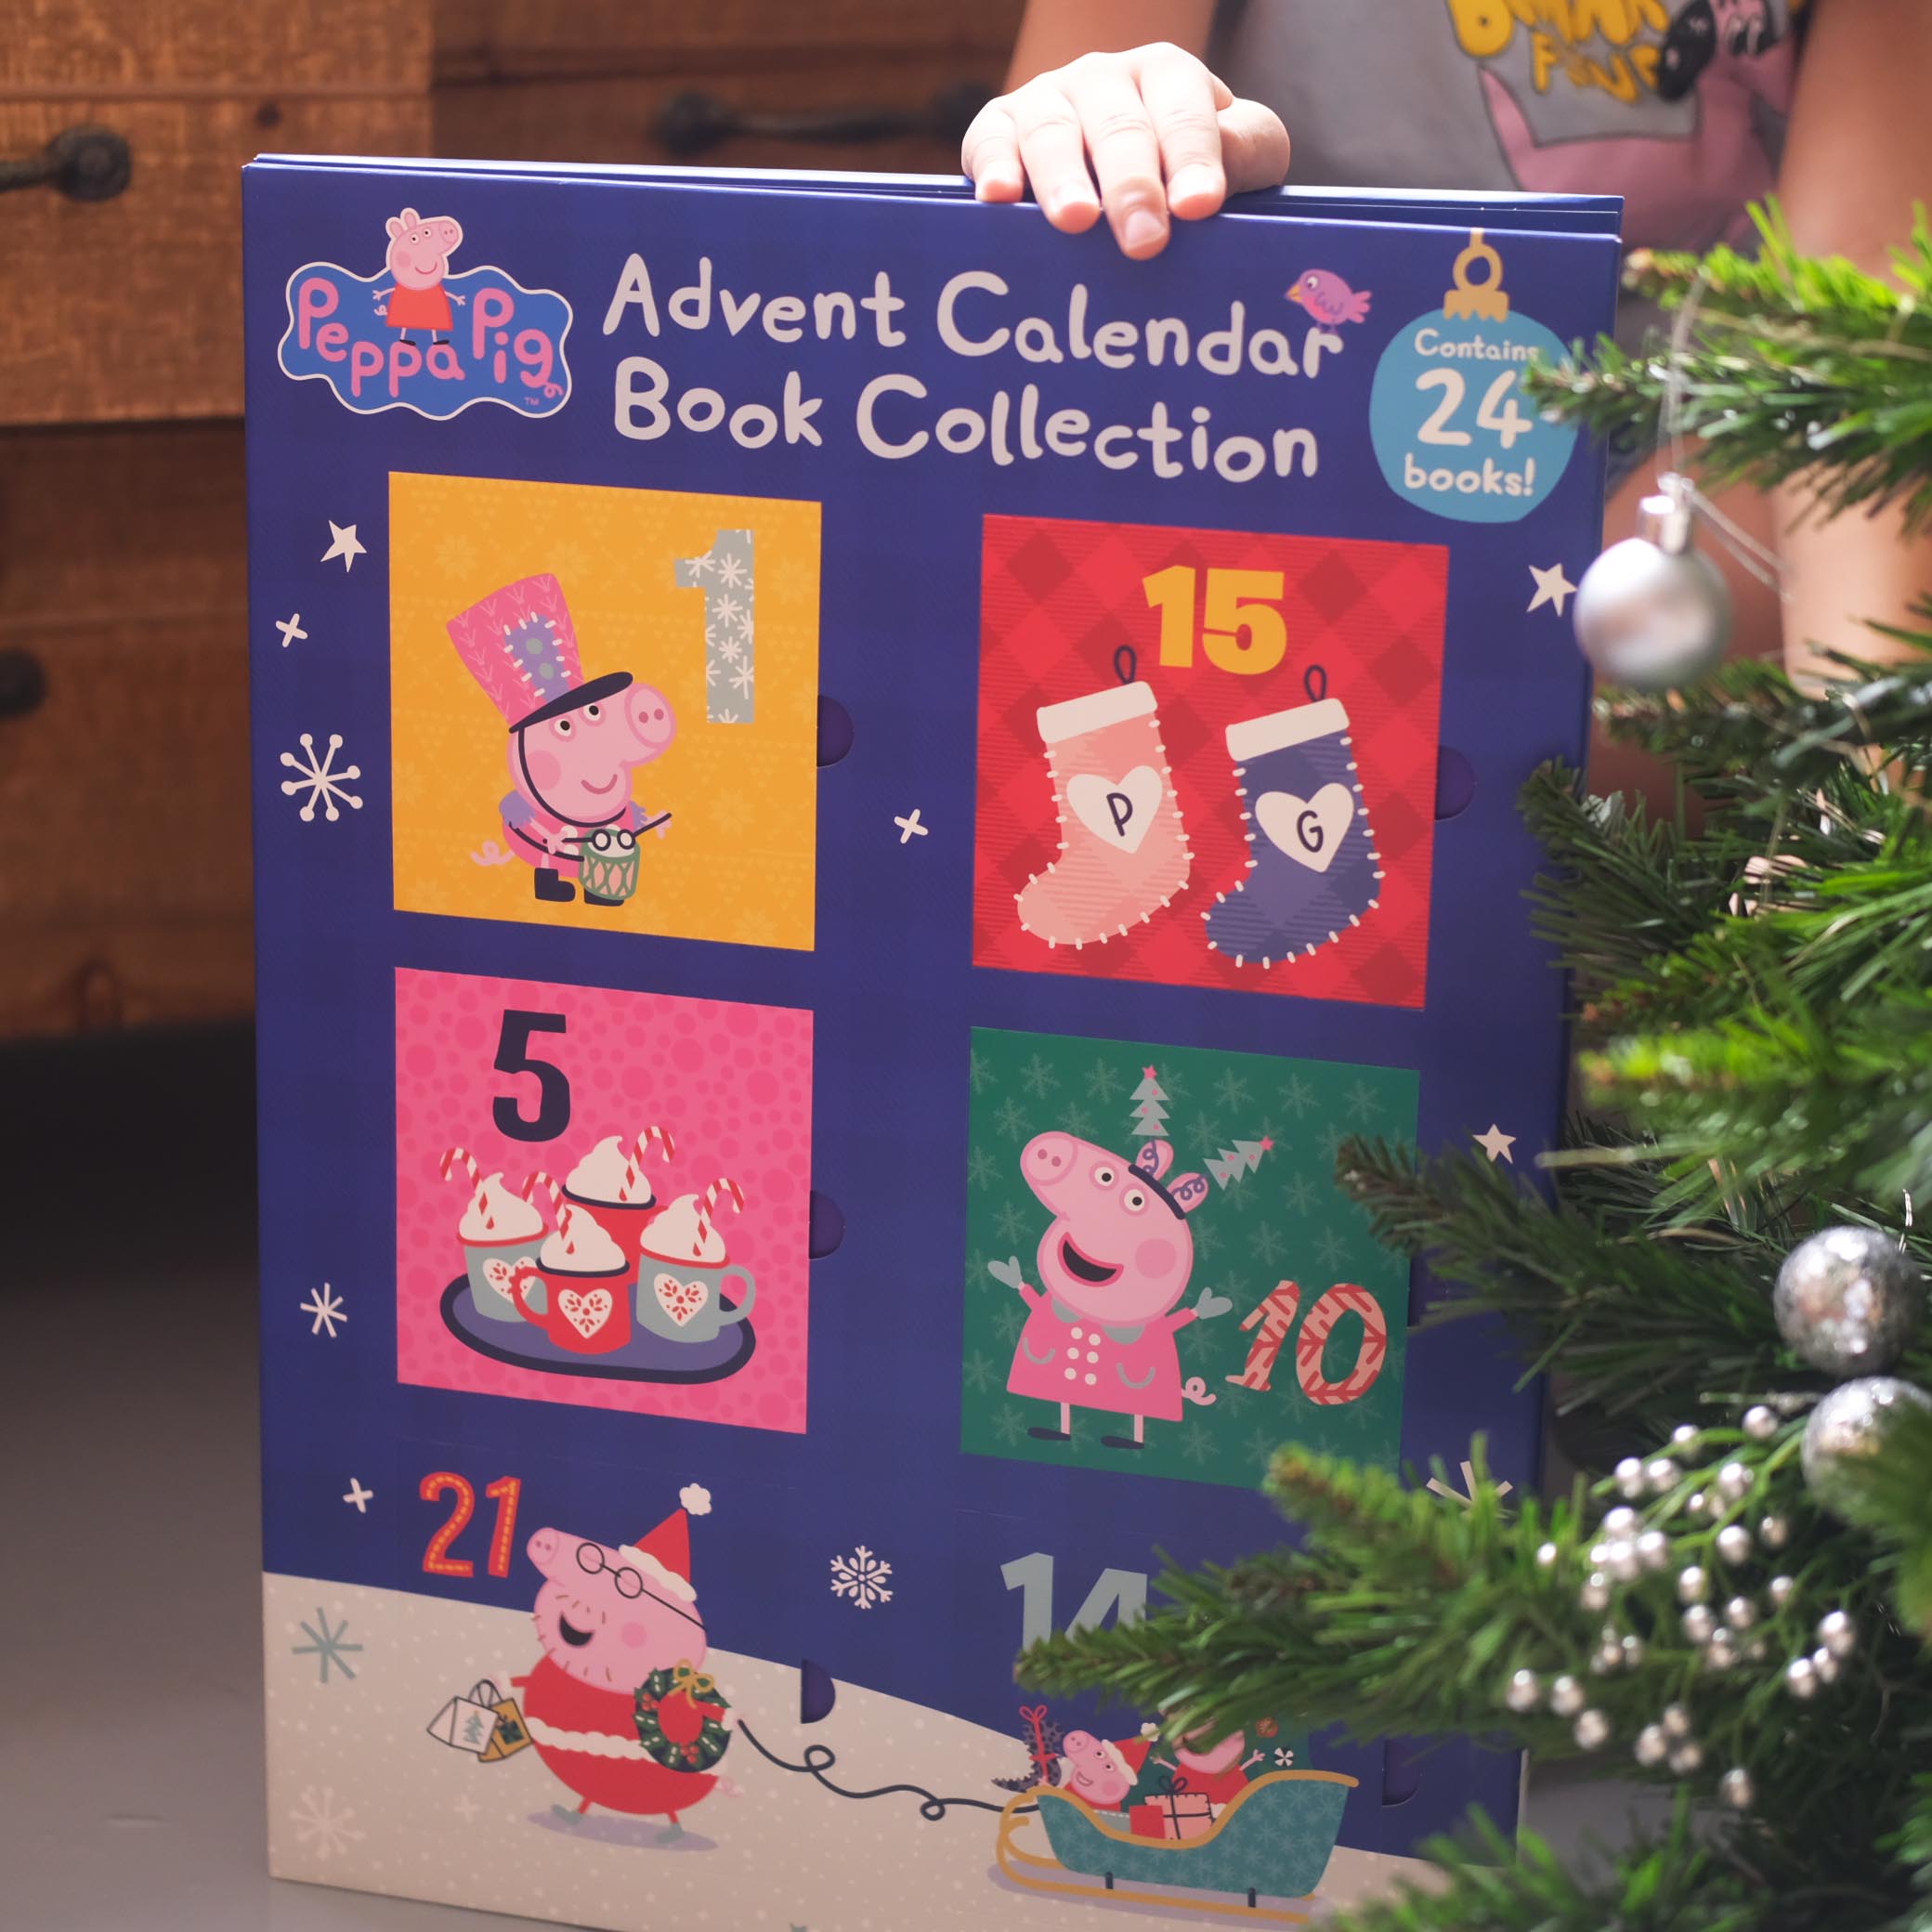 Opening Peppa Pig Advent Book Collection Calendar 2021 - 24 books